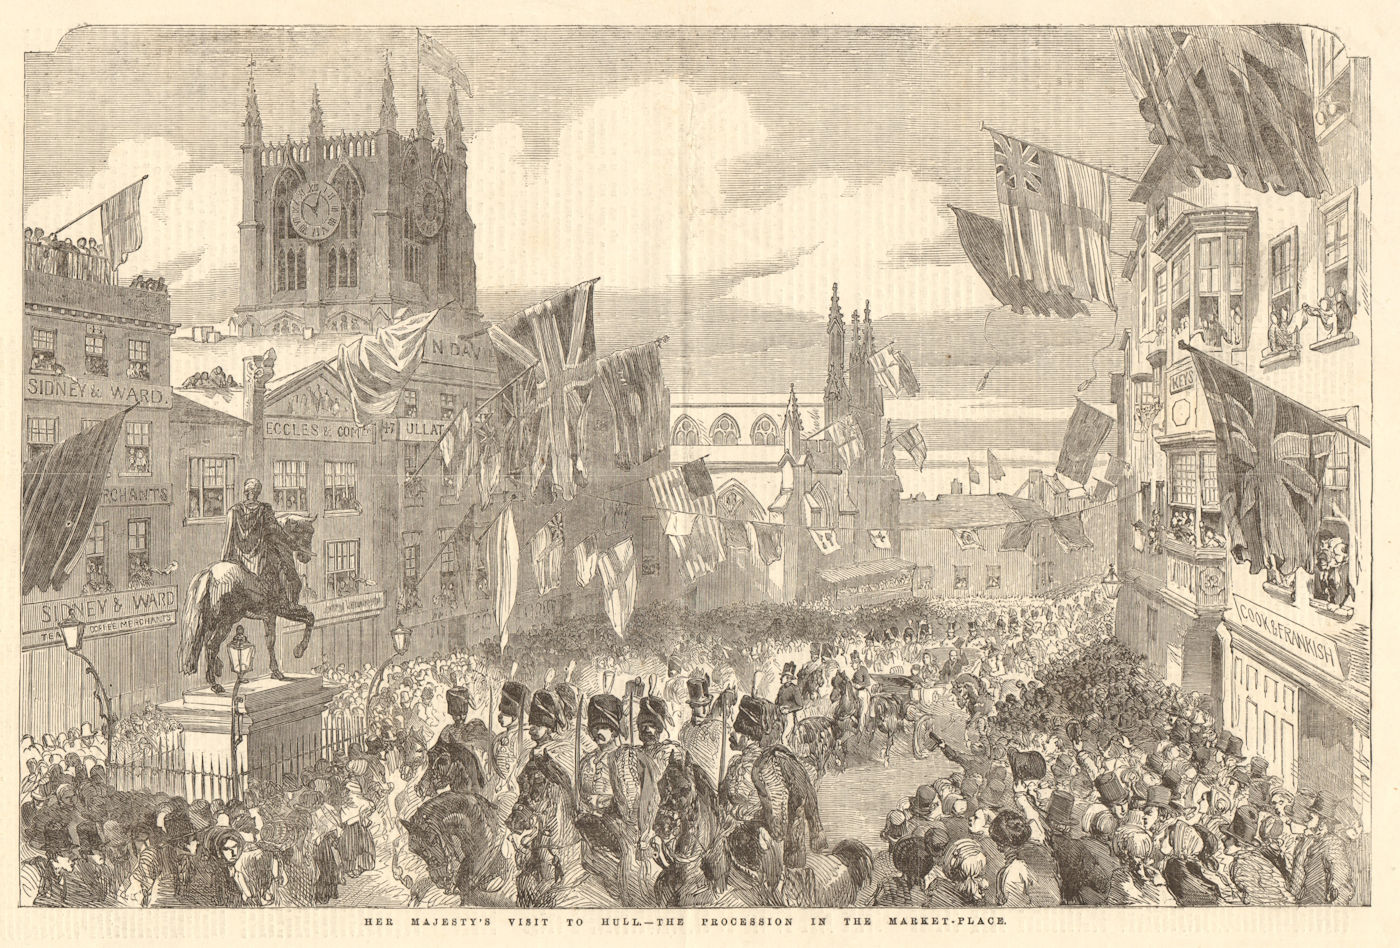 Associate Product Her Majesty's visit to Hull - the procession in the market-place. Yorkshire 1854